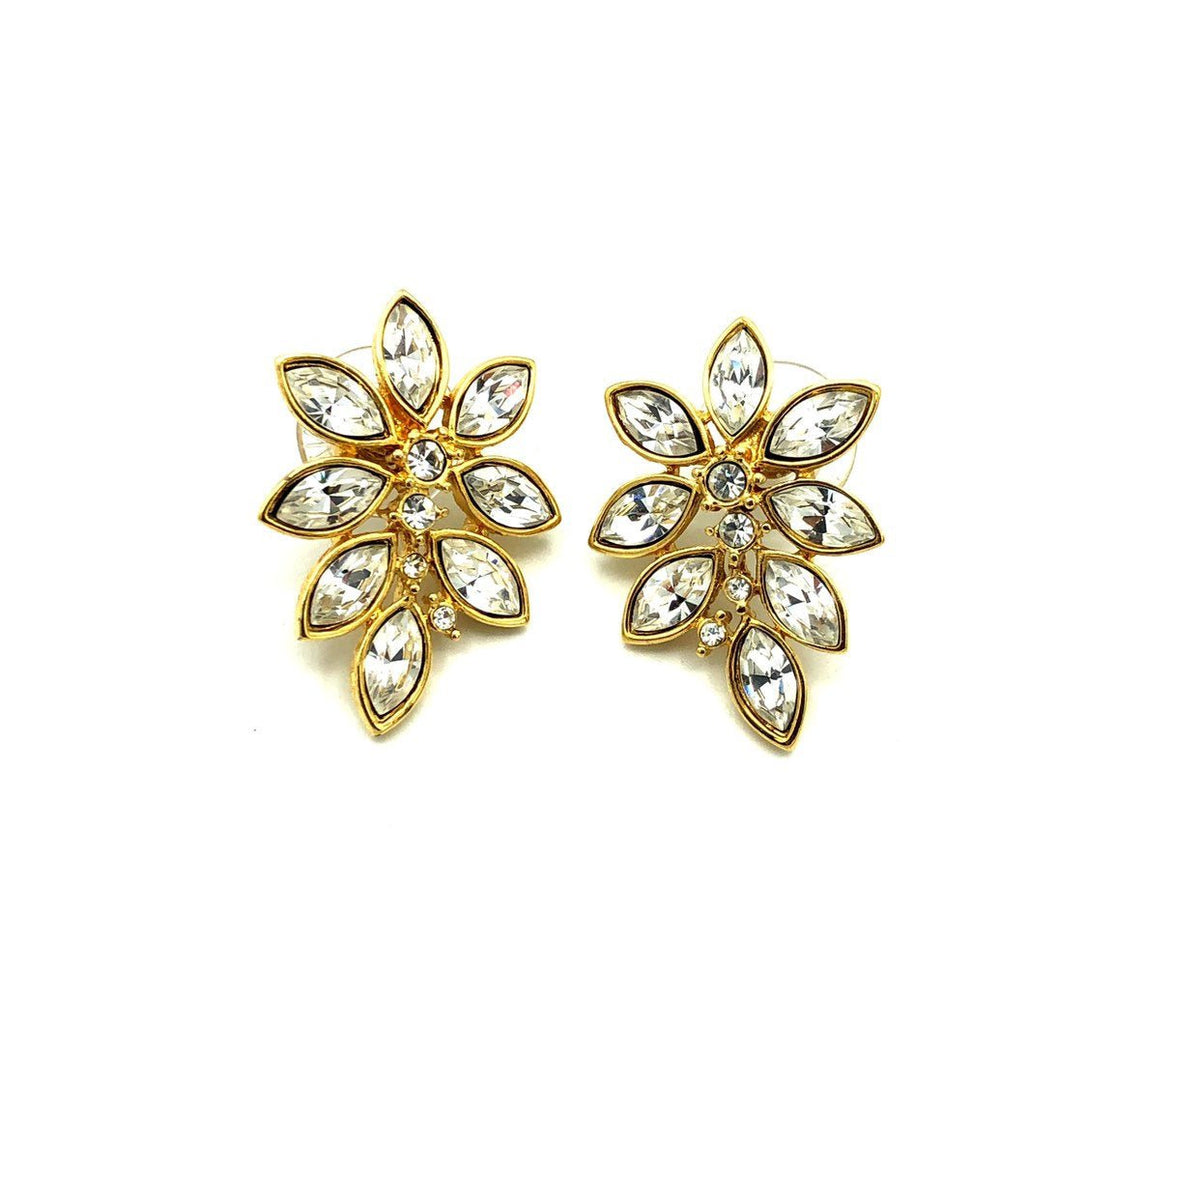 Vintage Monet Marquise Clear Rhinestone Floral Pierced Earrings - 24 Wishes Vintage Jewelry